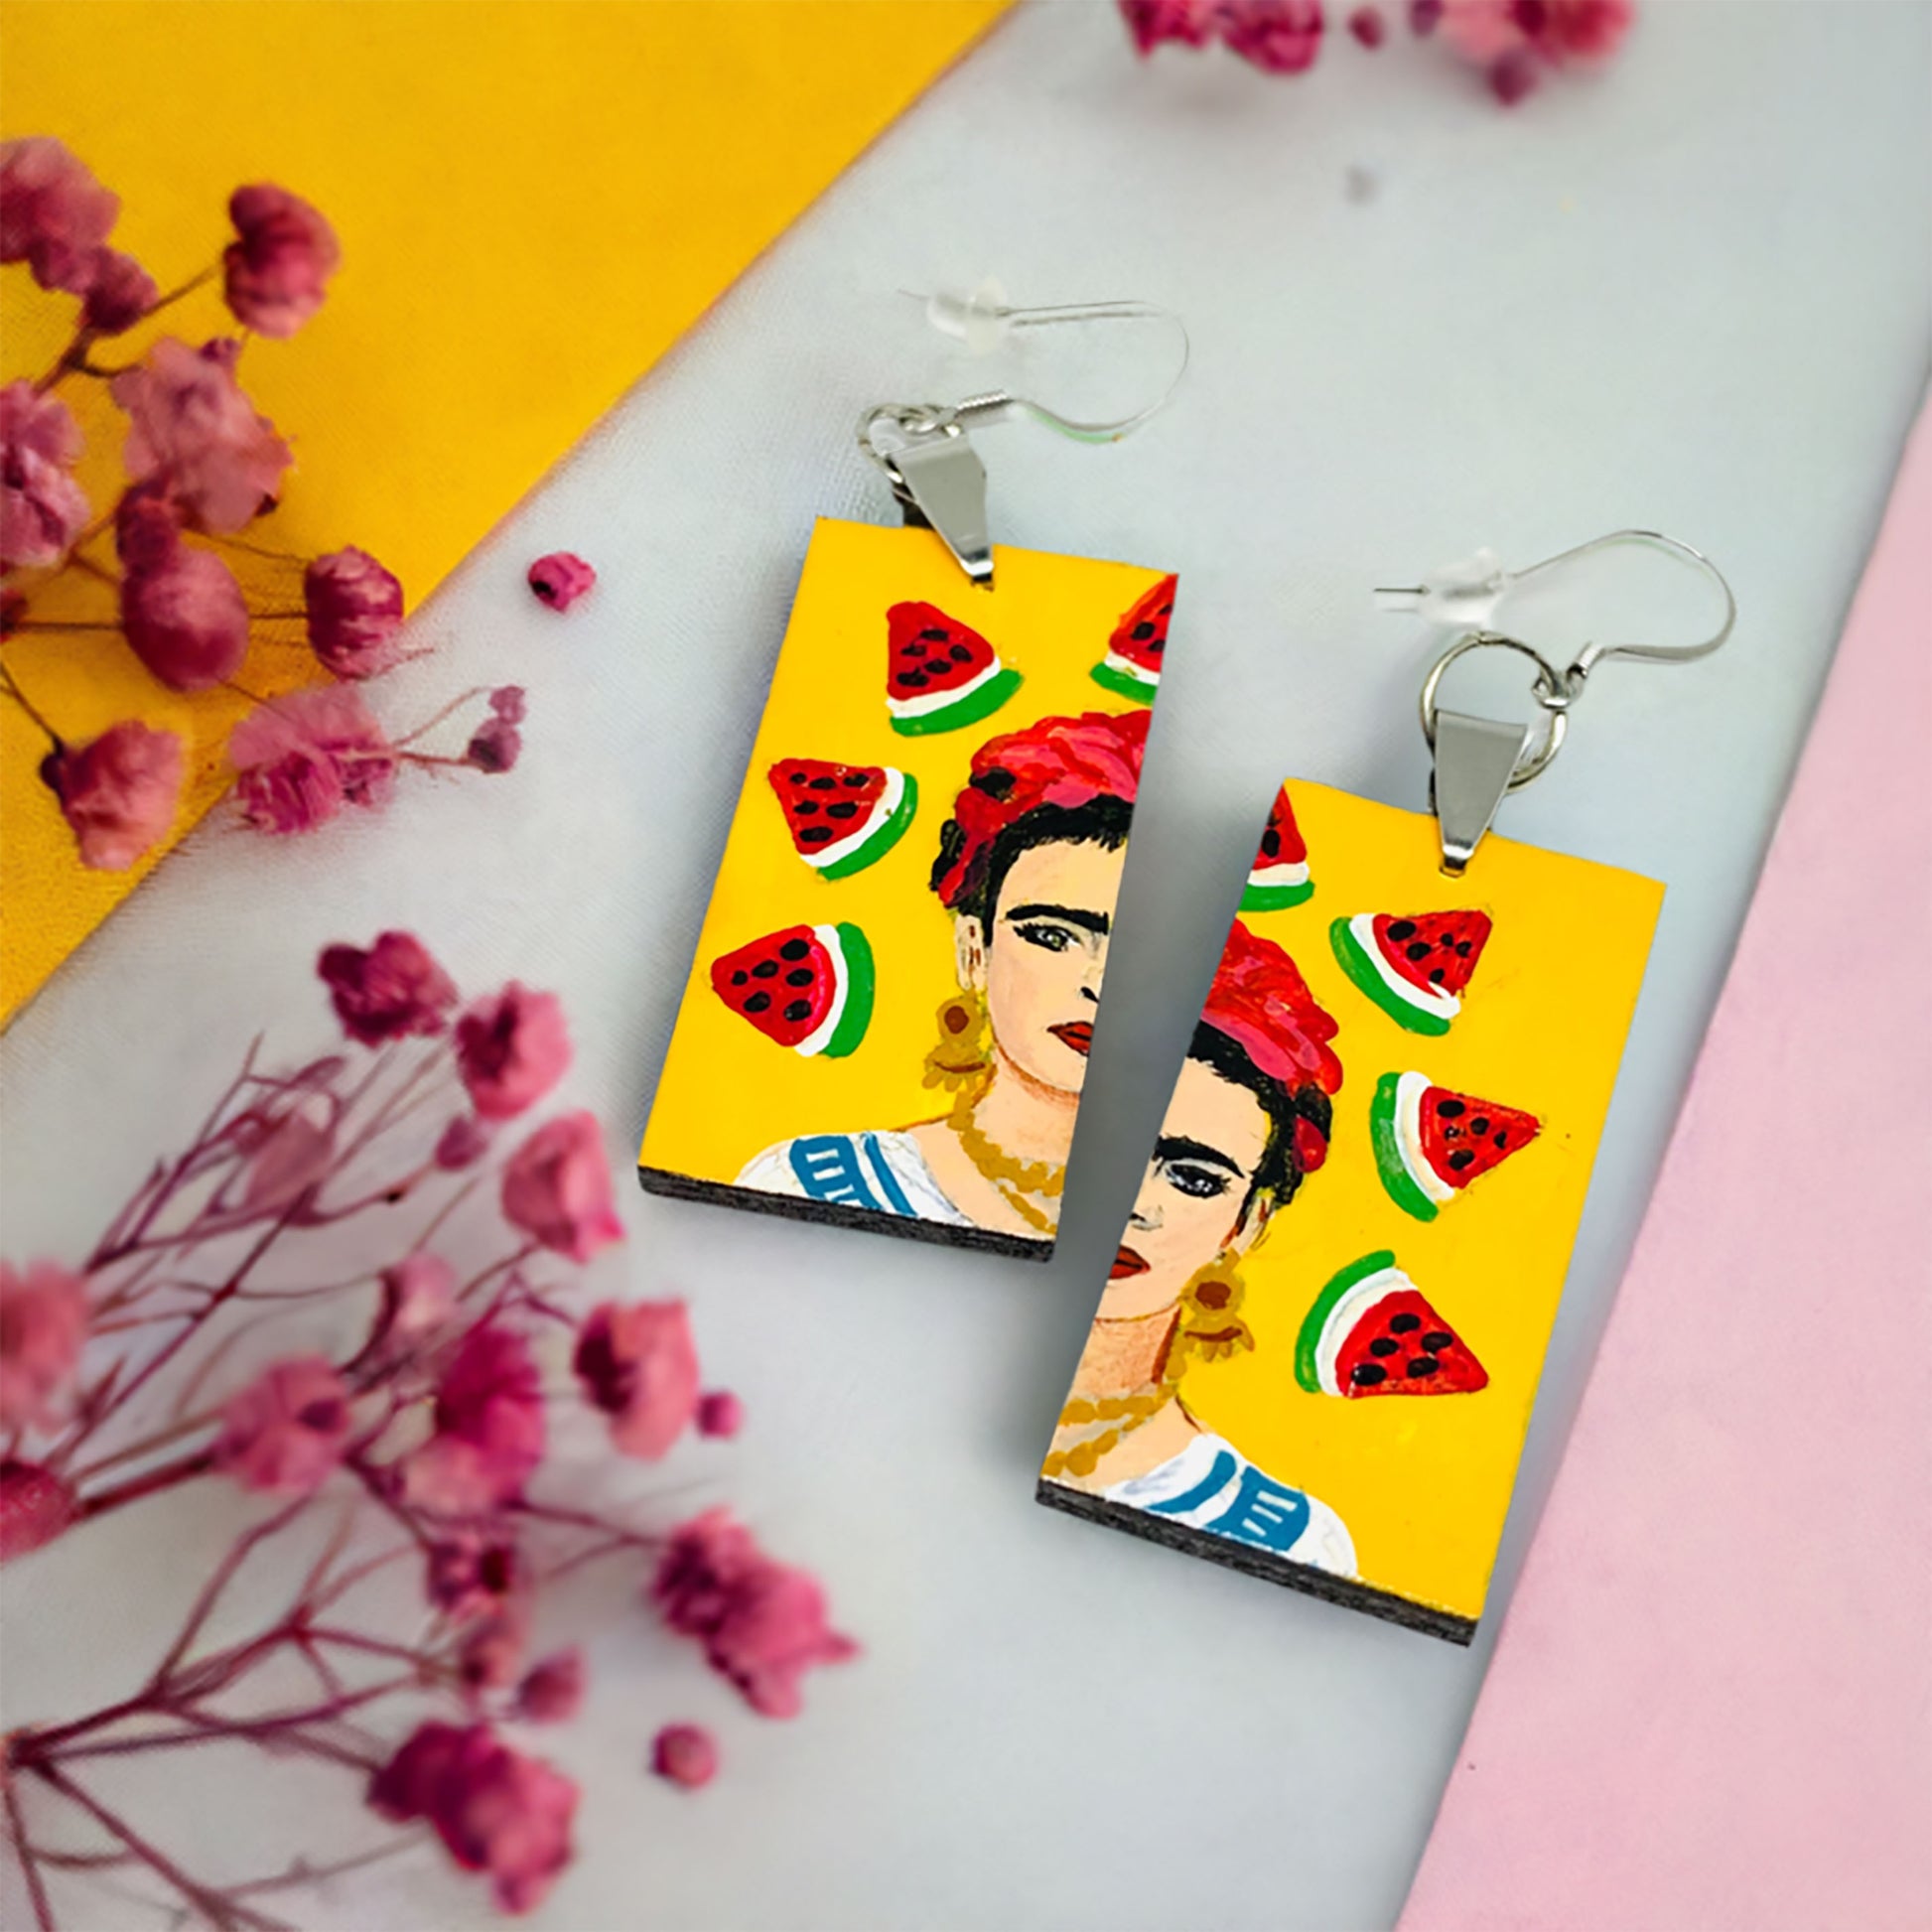 Frida Kahlo viva la vida watermelon earrings. Mexican earrings. Mexican jewelry. Hand painted earrings uniquely designed by Mexico artisan jewelry for fridamaniacs, fridalovers, fridamania, frida fans women and girls. Gorgeous and original gift idea.